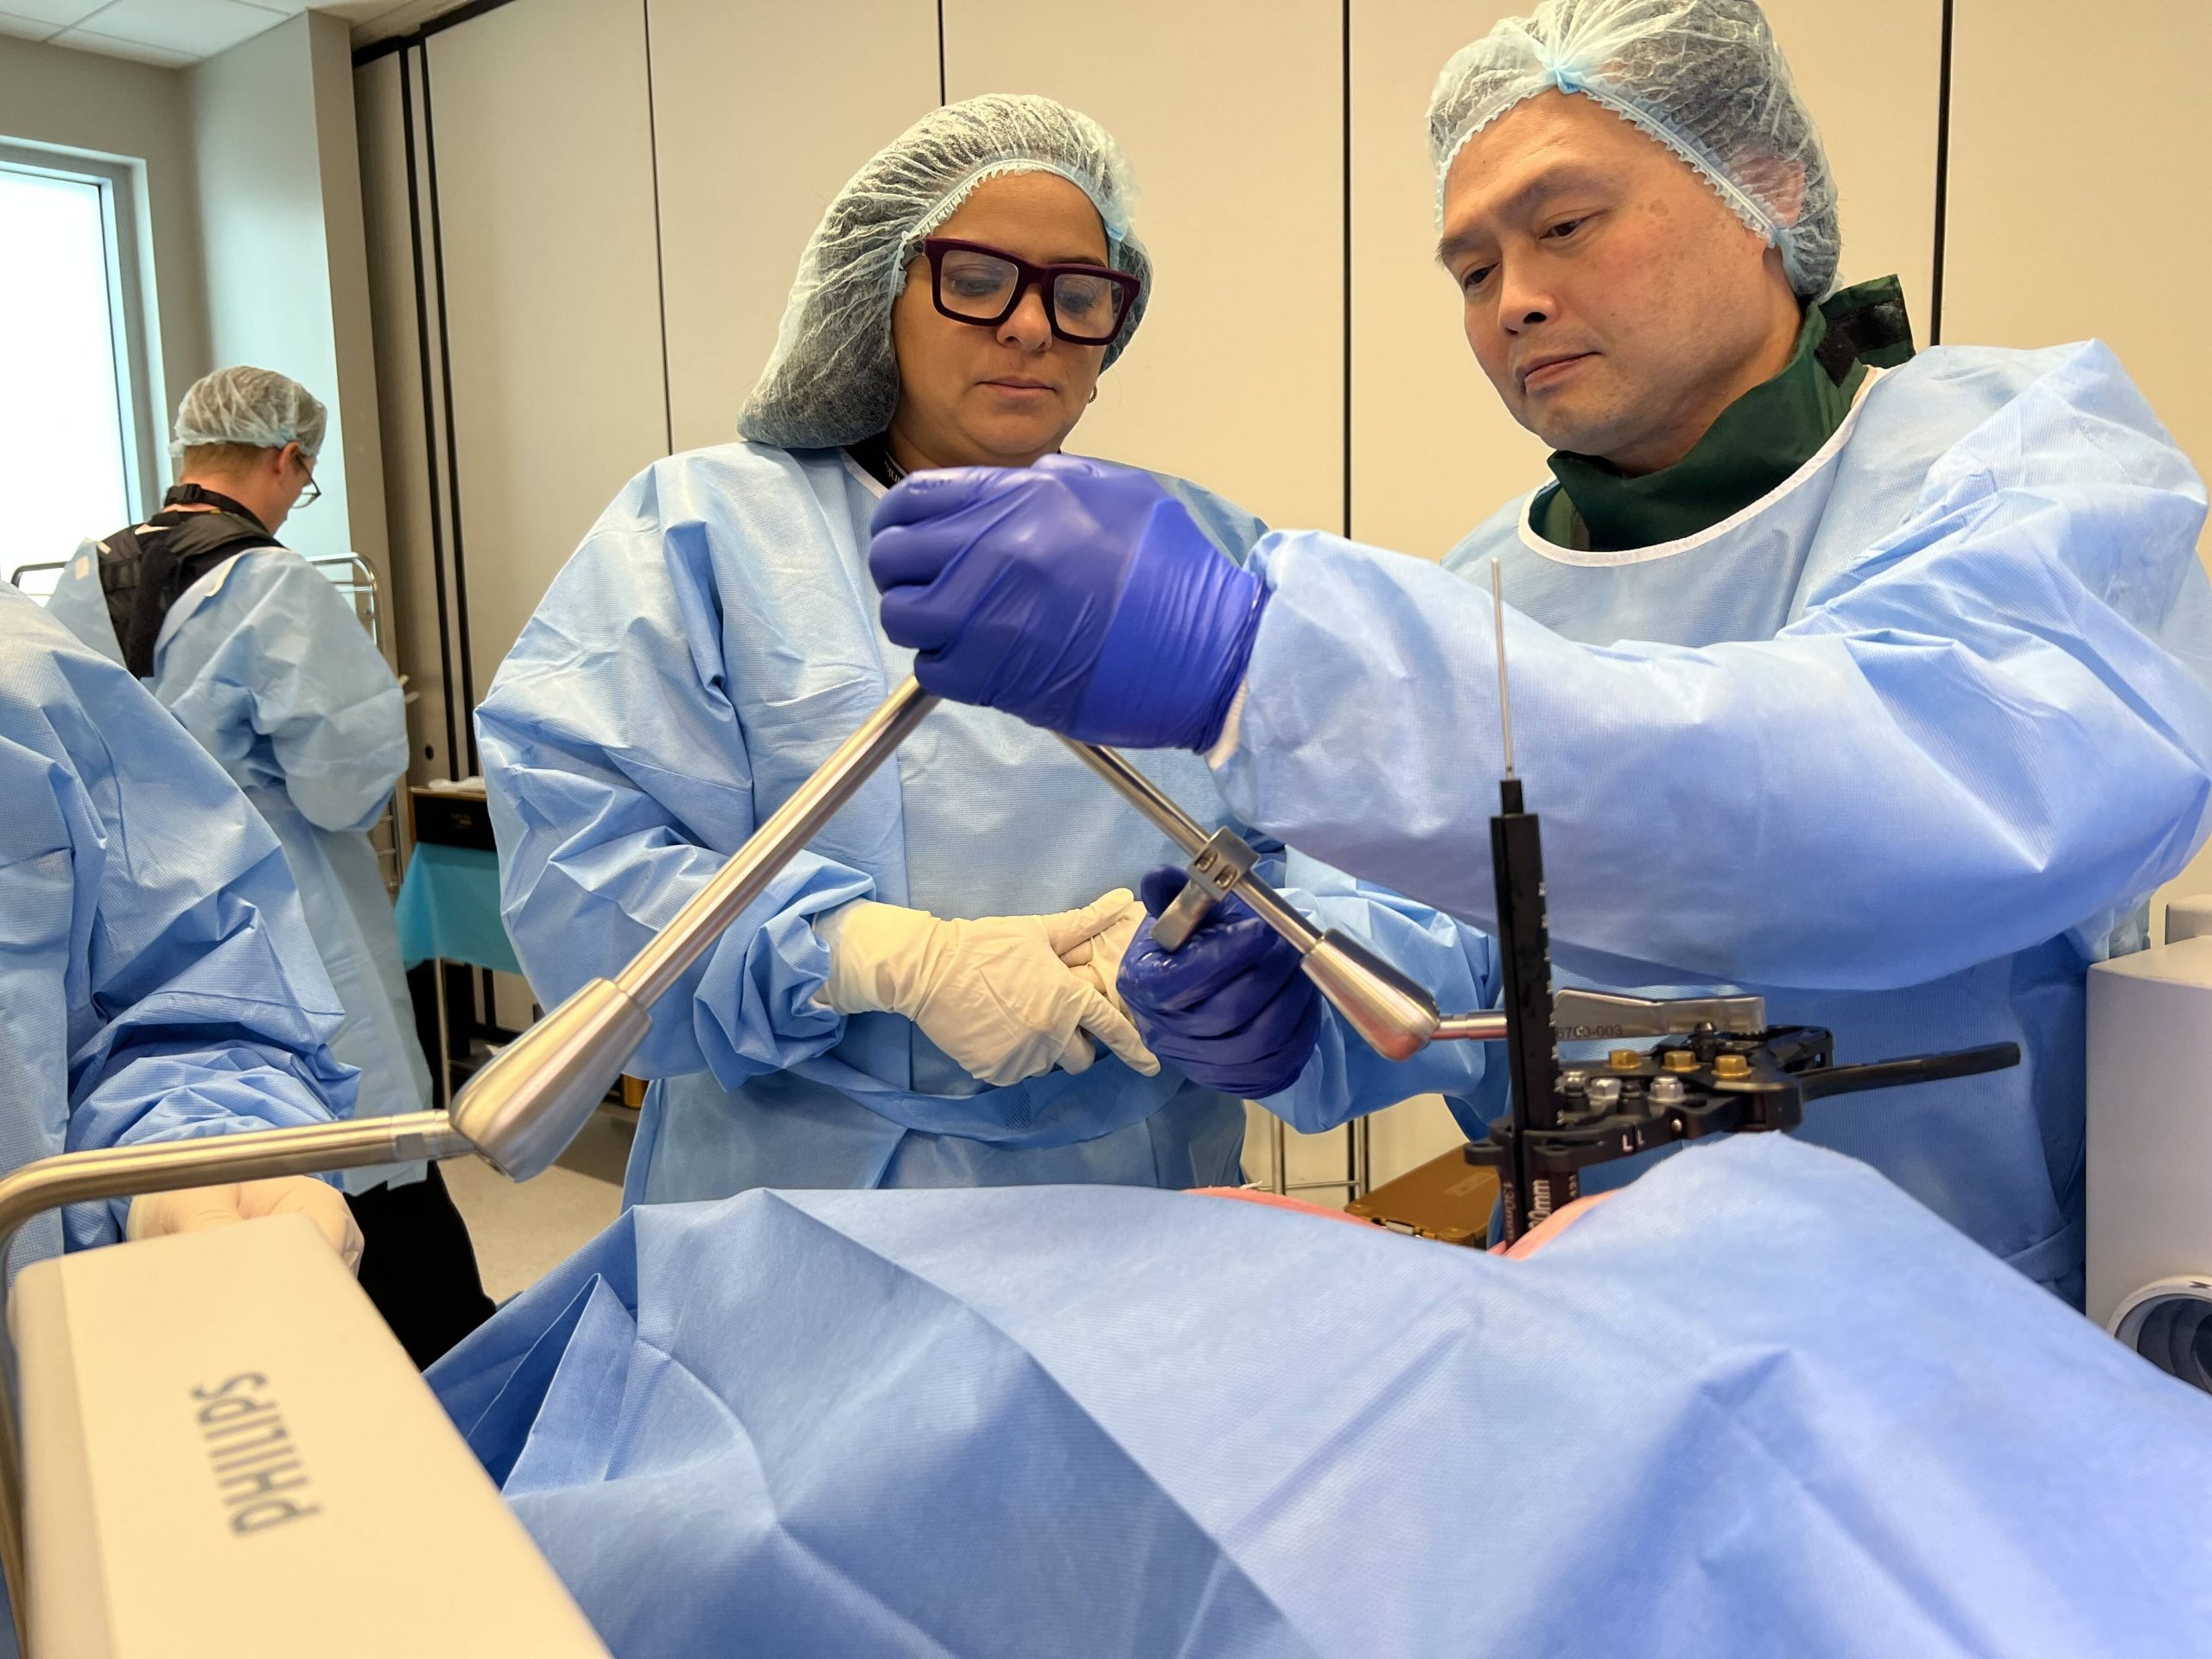 Panhandle spine surgeon incorporates new CoreLink surgical device into procedures